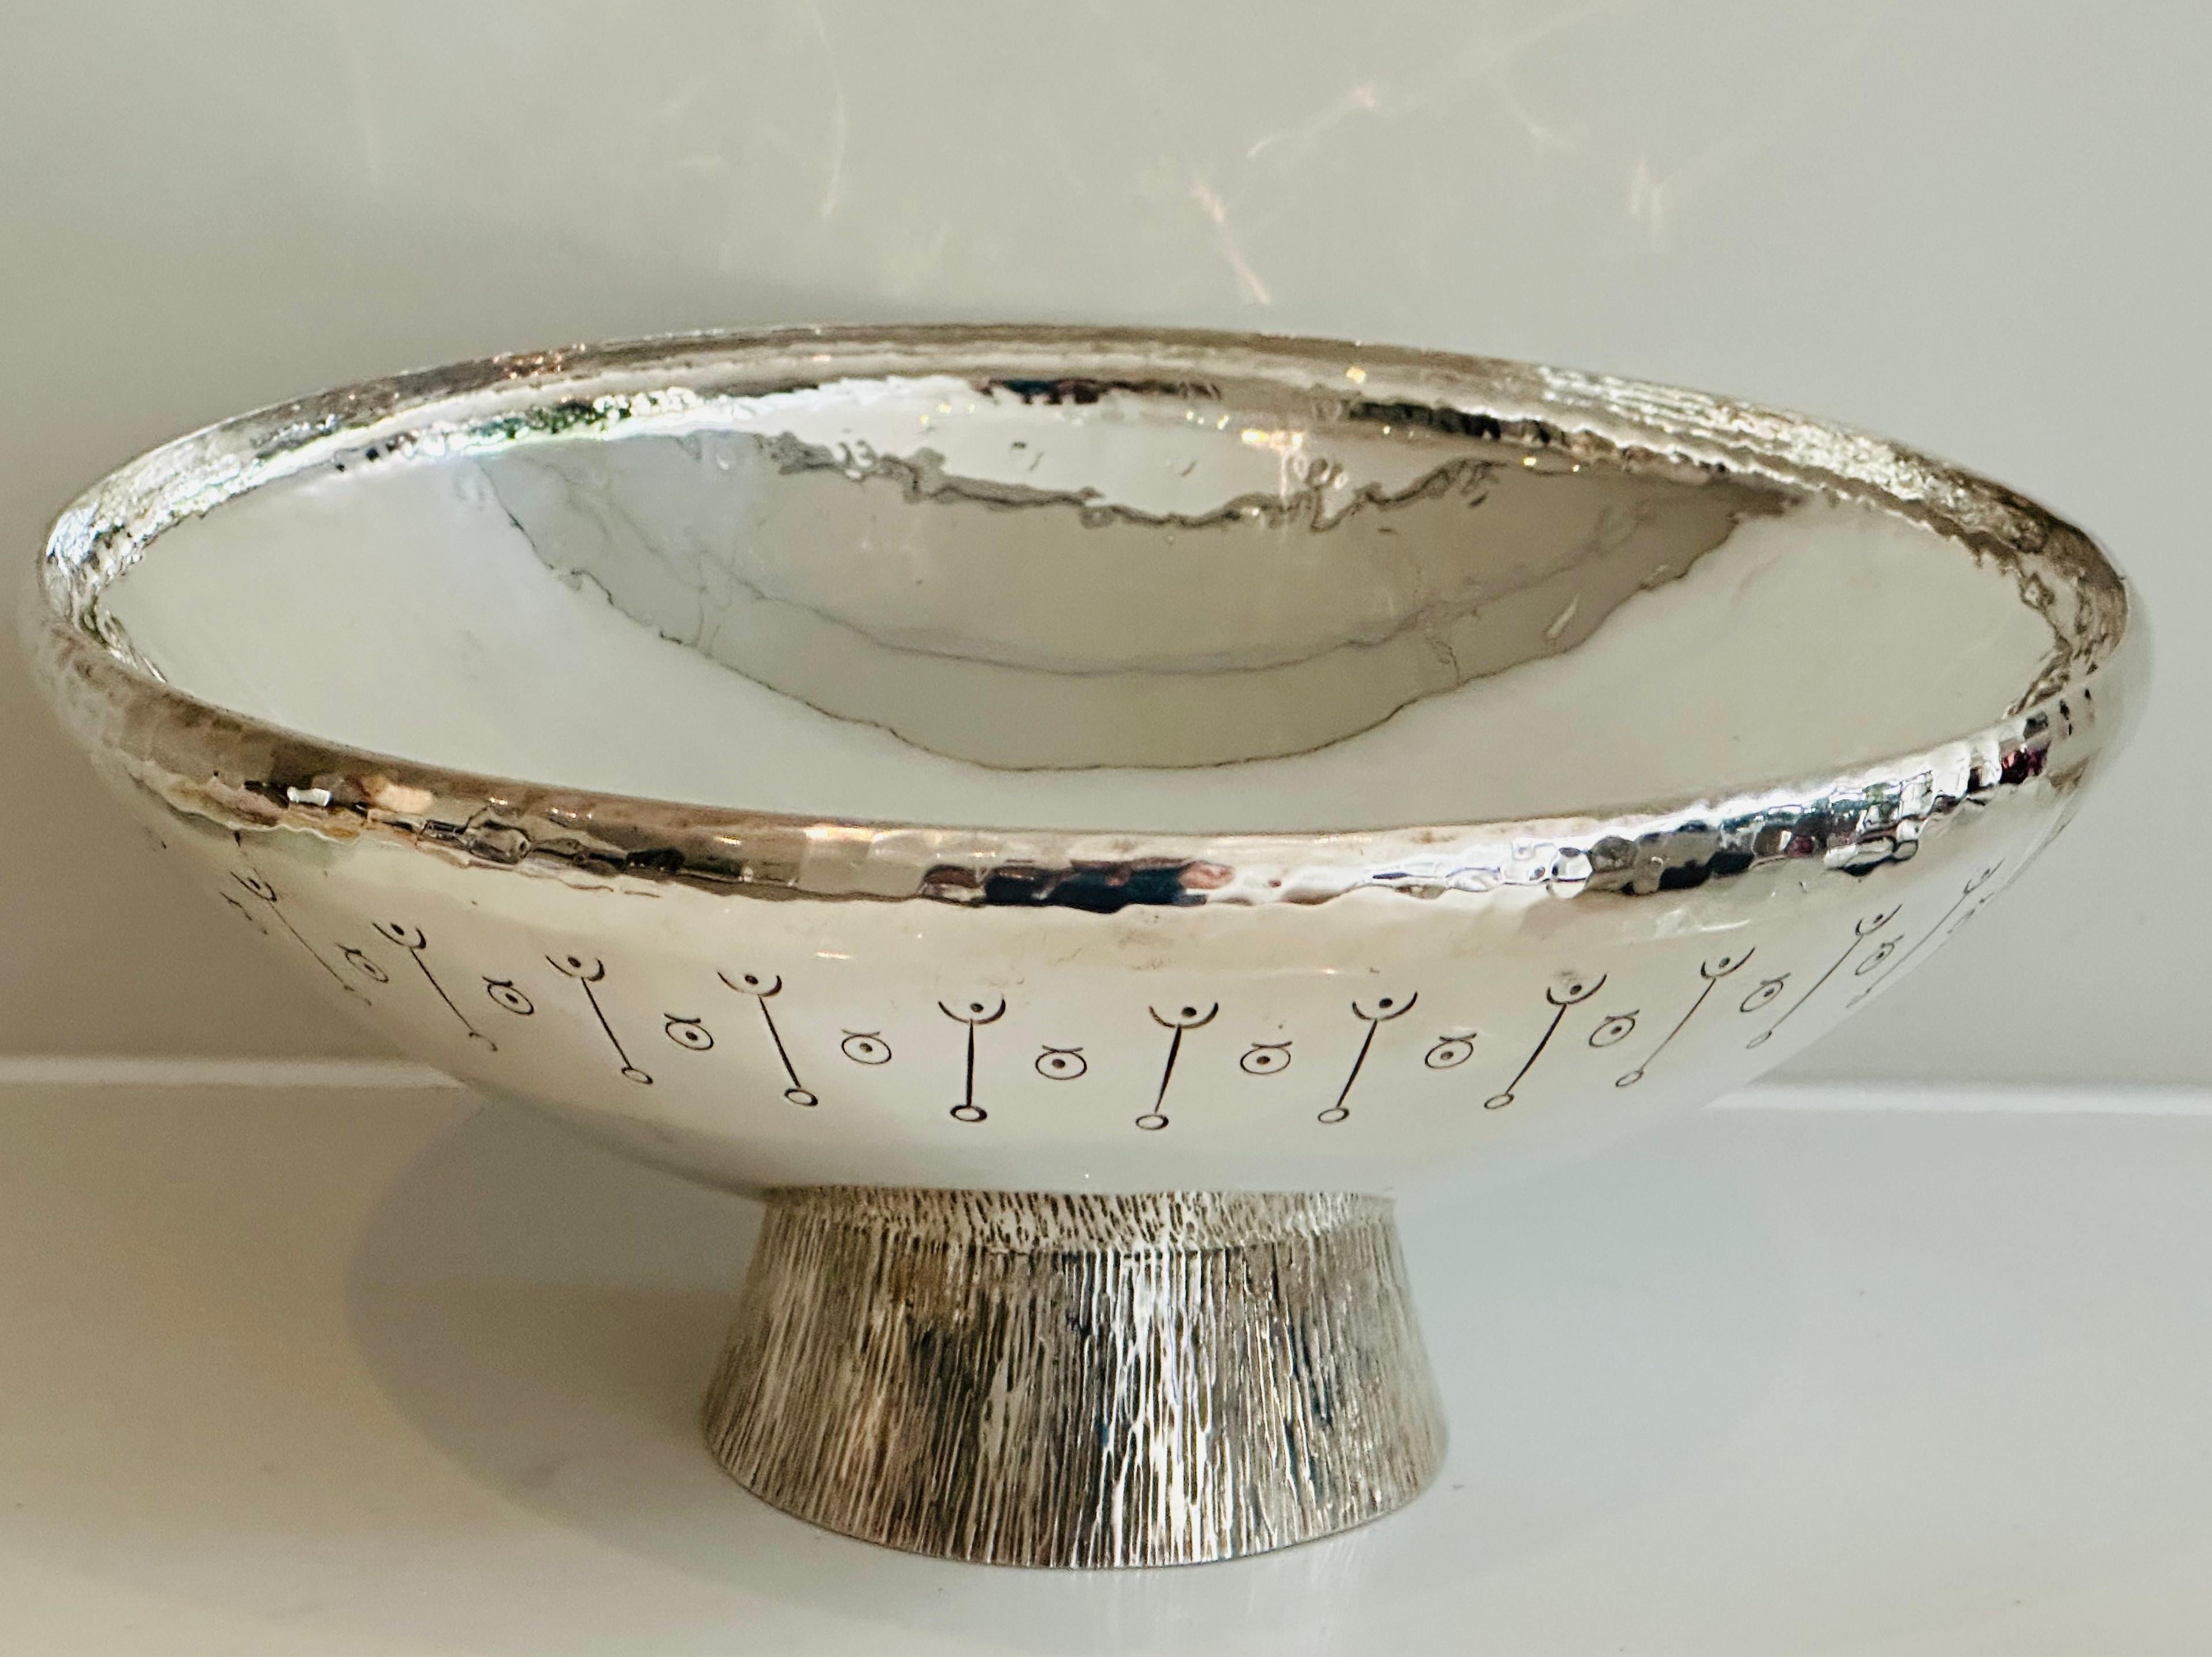 1980s English Silver Plated Decorative Hand-Hammered Serving or Display Bowl 2